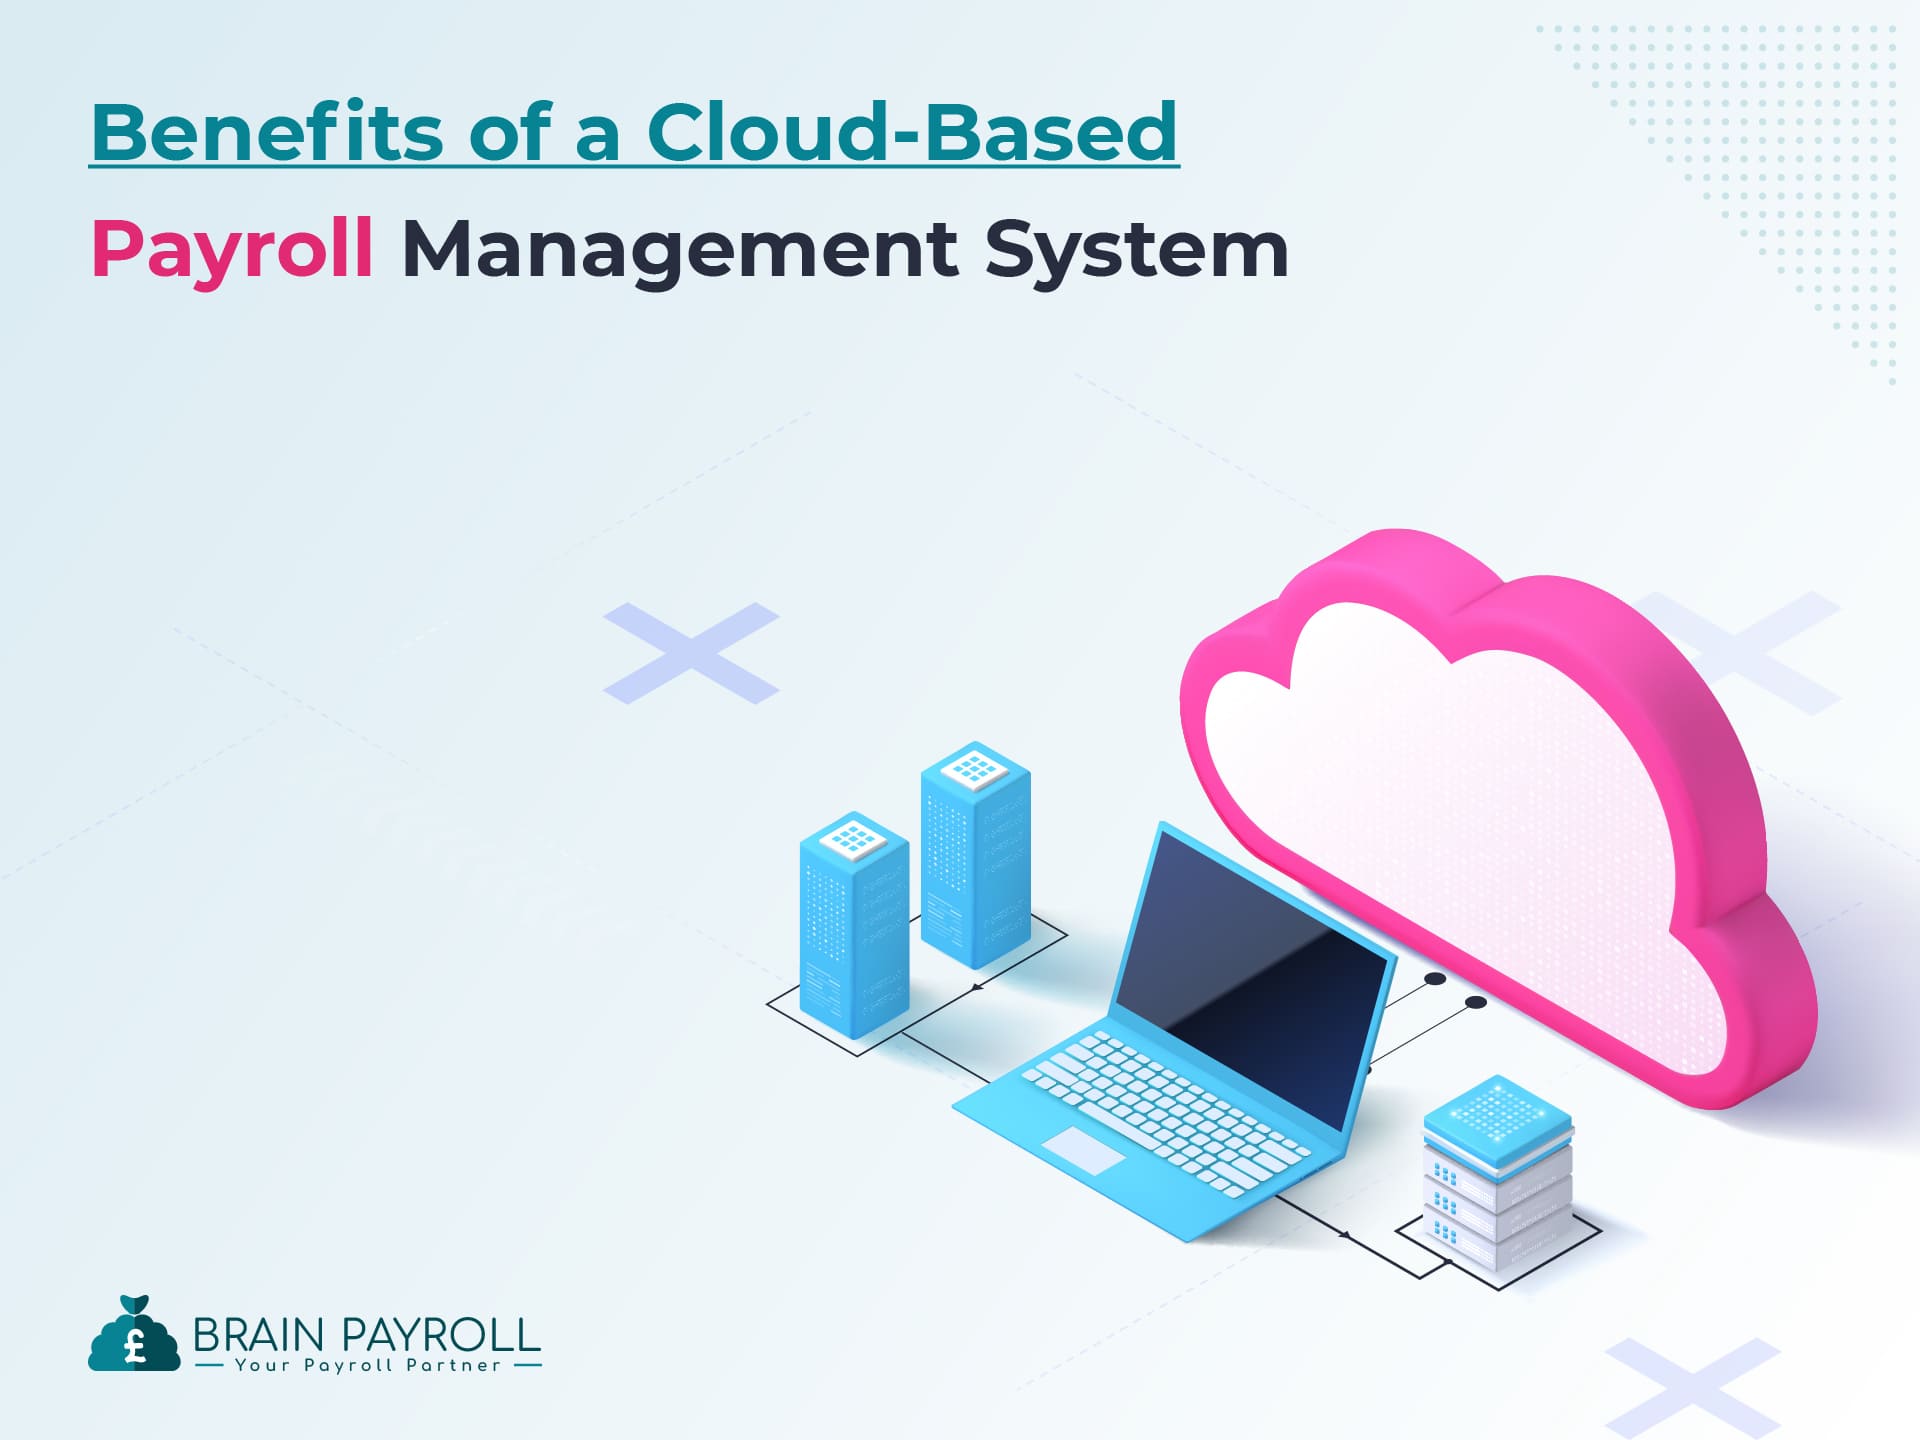 The Benefits of a Cloud-Based Payroll Management System